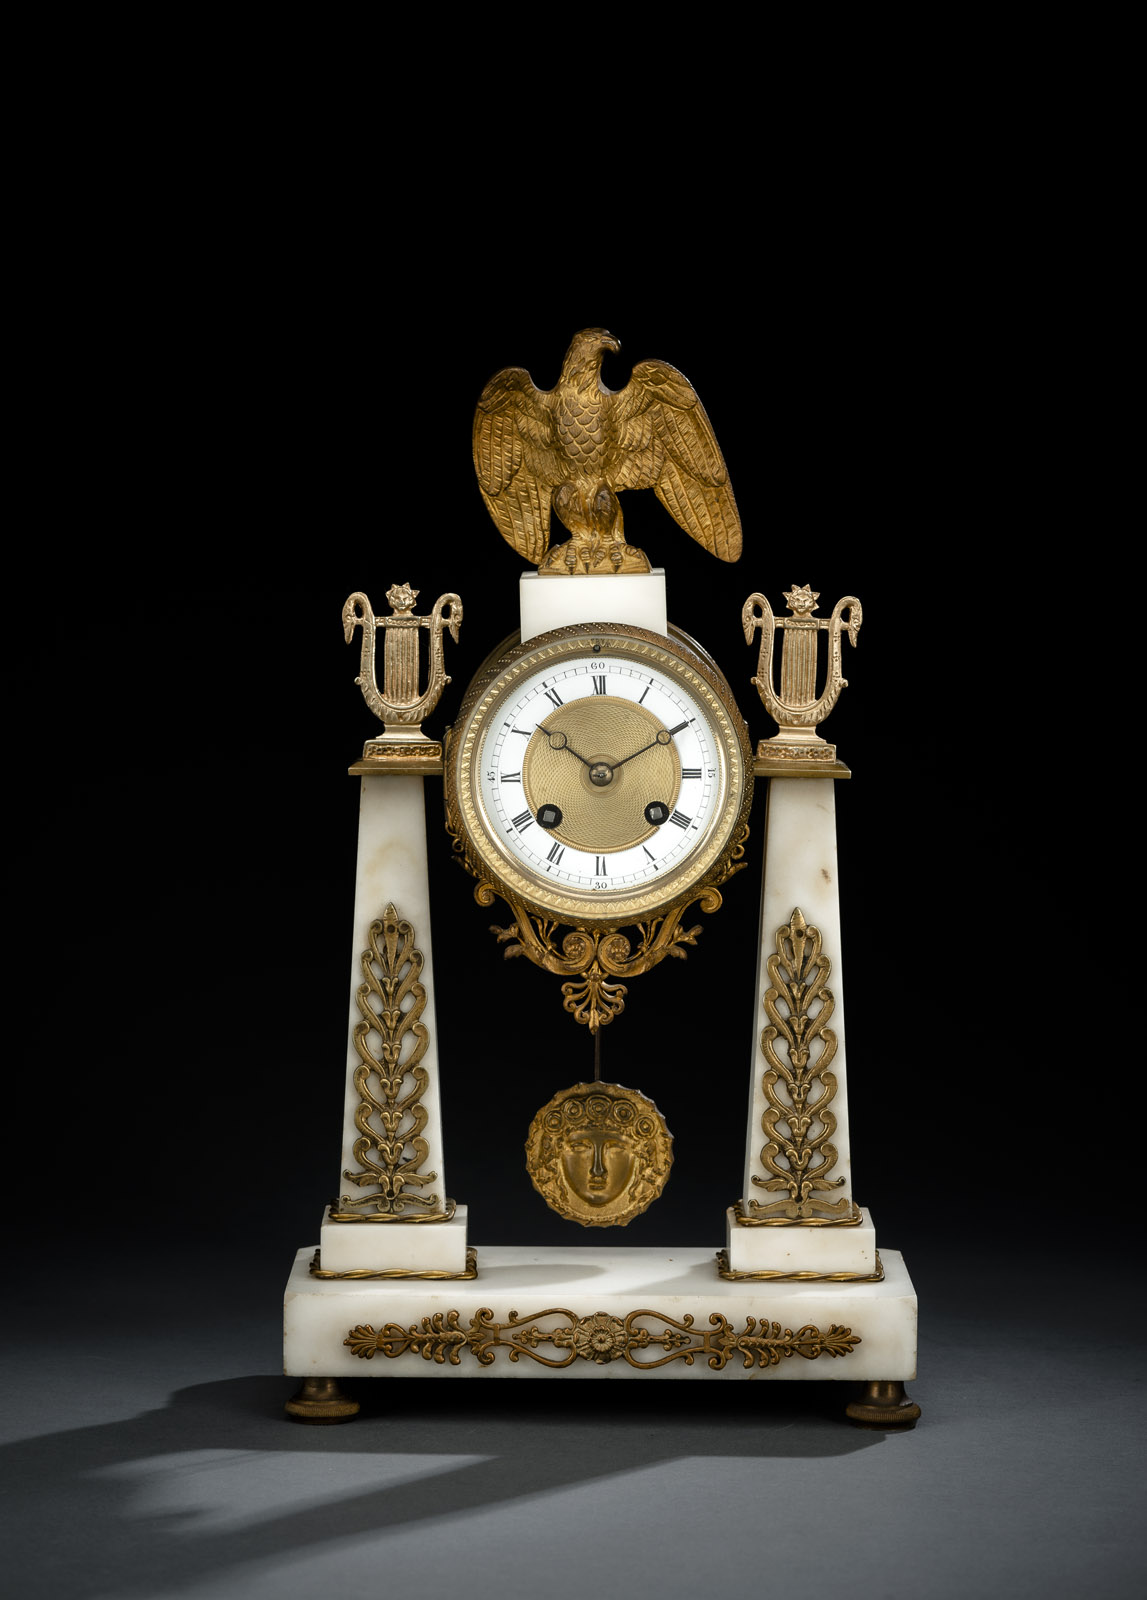 Marble with floral bronze applications, lyre and eagle coronation. Enamel dial ring with Roman numerals and minutes. Parisian work, hour striking on bell, spring suspension of Medusa pendulum. Rest., eagle and lyre later added. Running not checked.